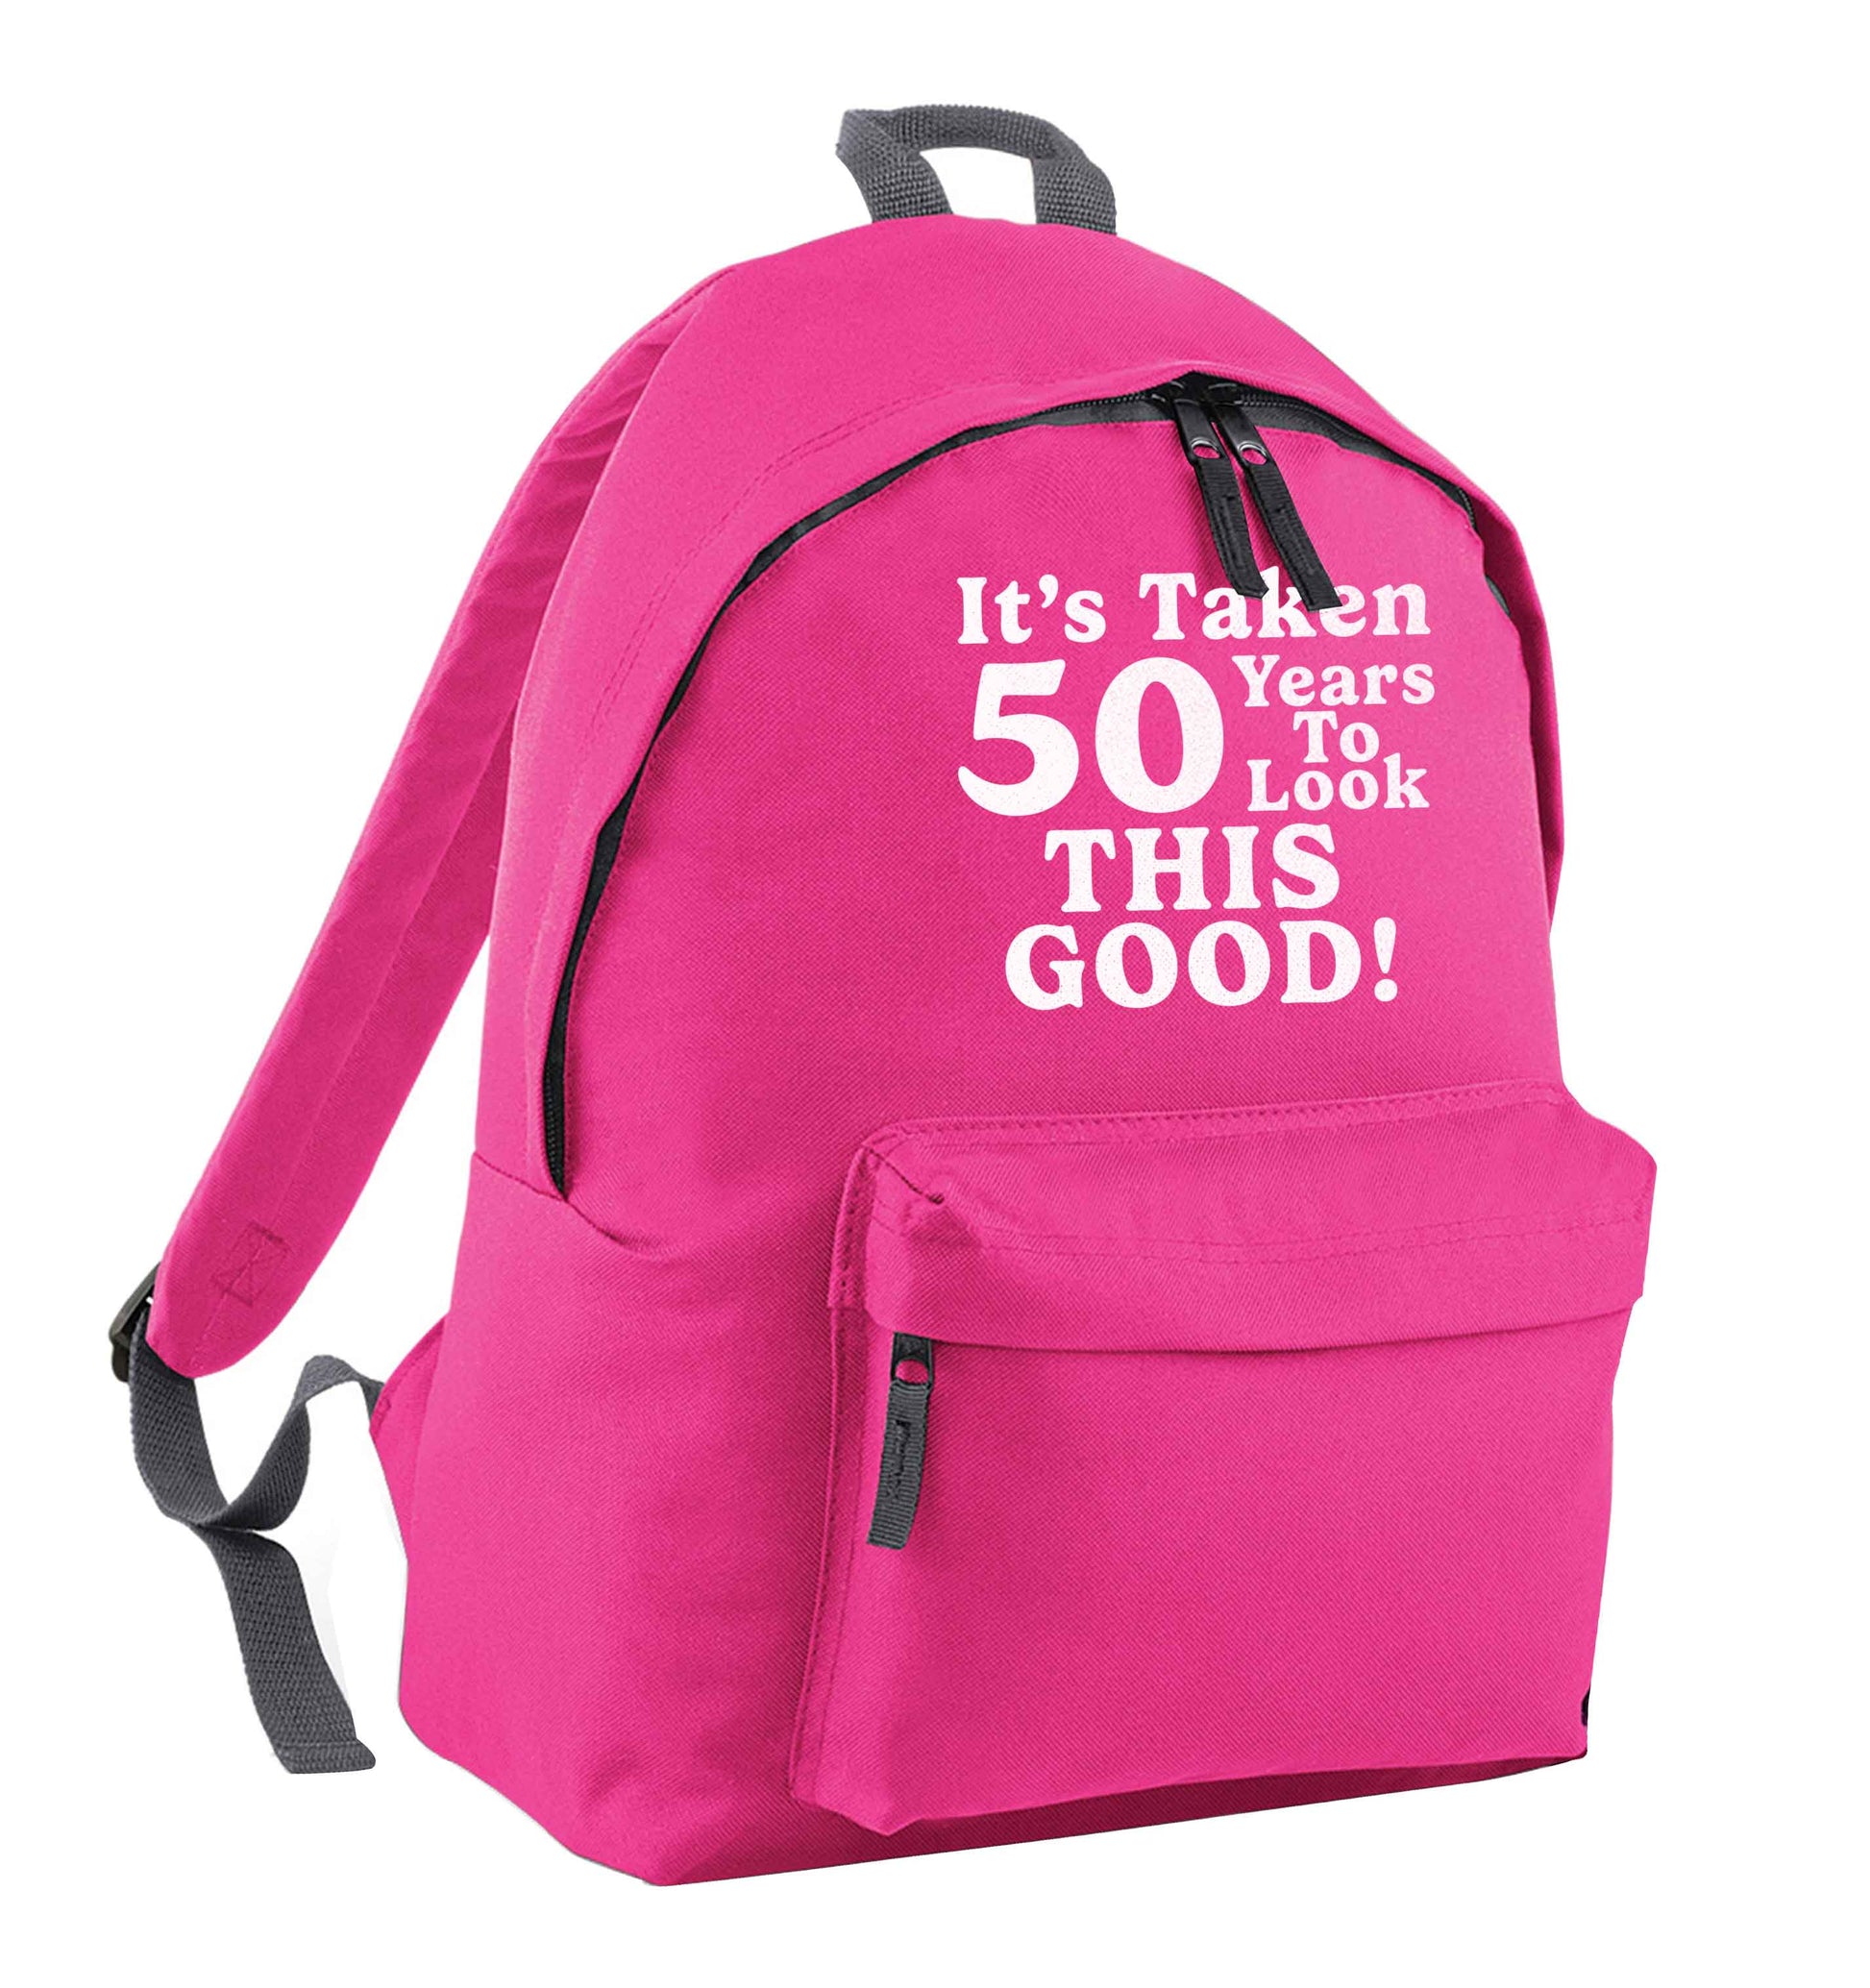 It's taken 50 years to look this good! pink adults backpack